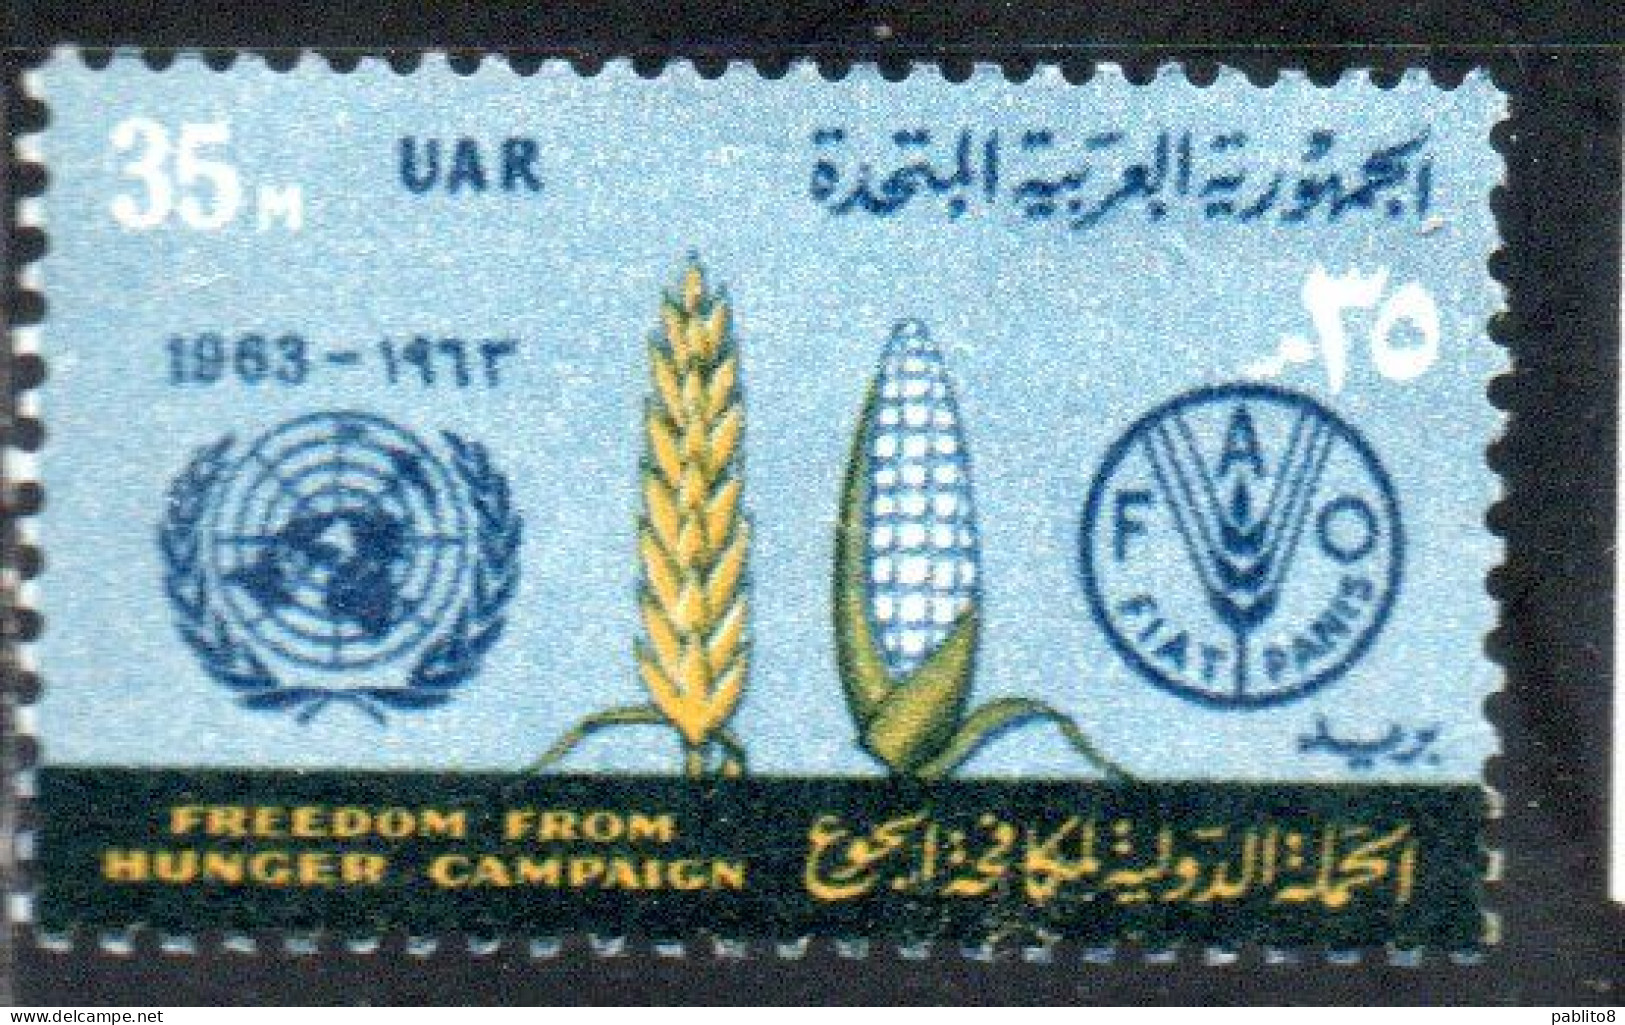 UAR EGYPT EGITTO 1963 FAO FREEDOM FROM HUNGER CAMPAIGN WHEAT CORN AND EMBLEMS 35m  MNH - Unused Stamps